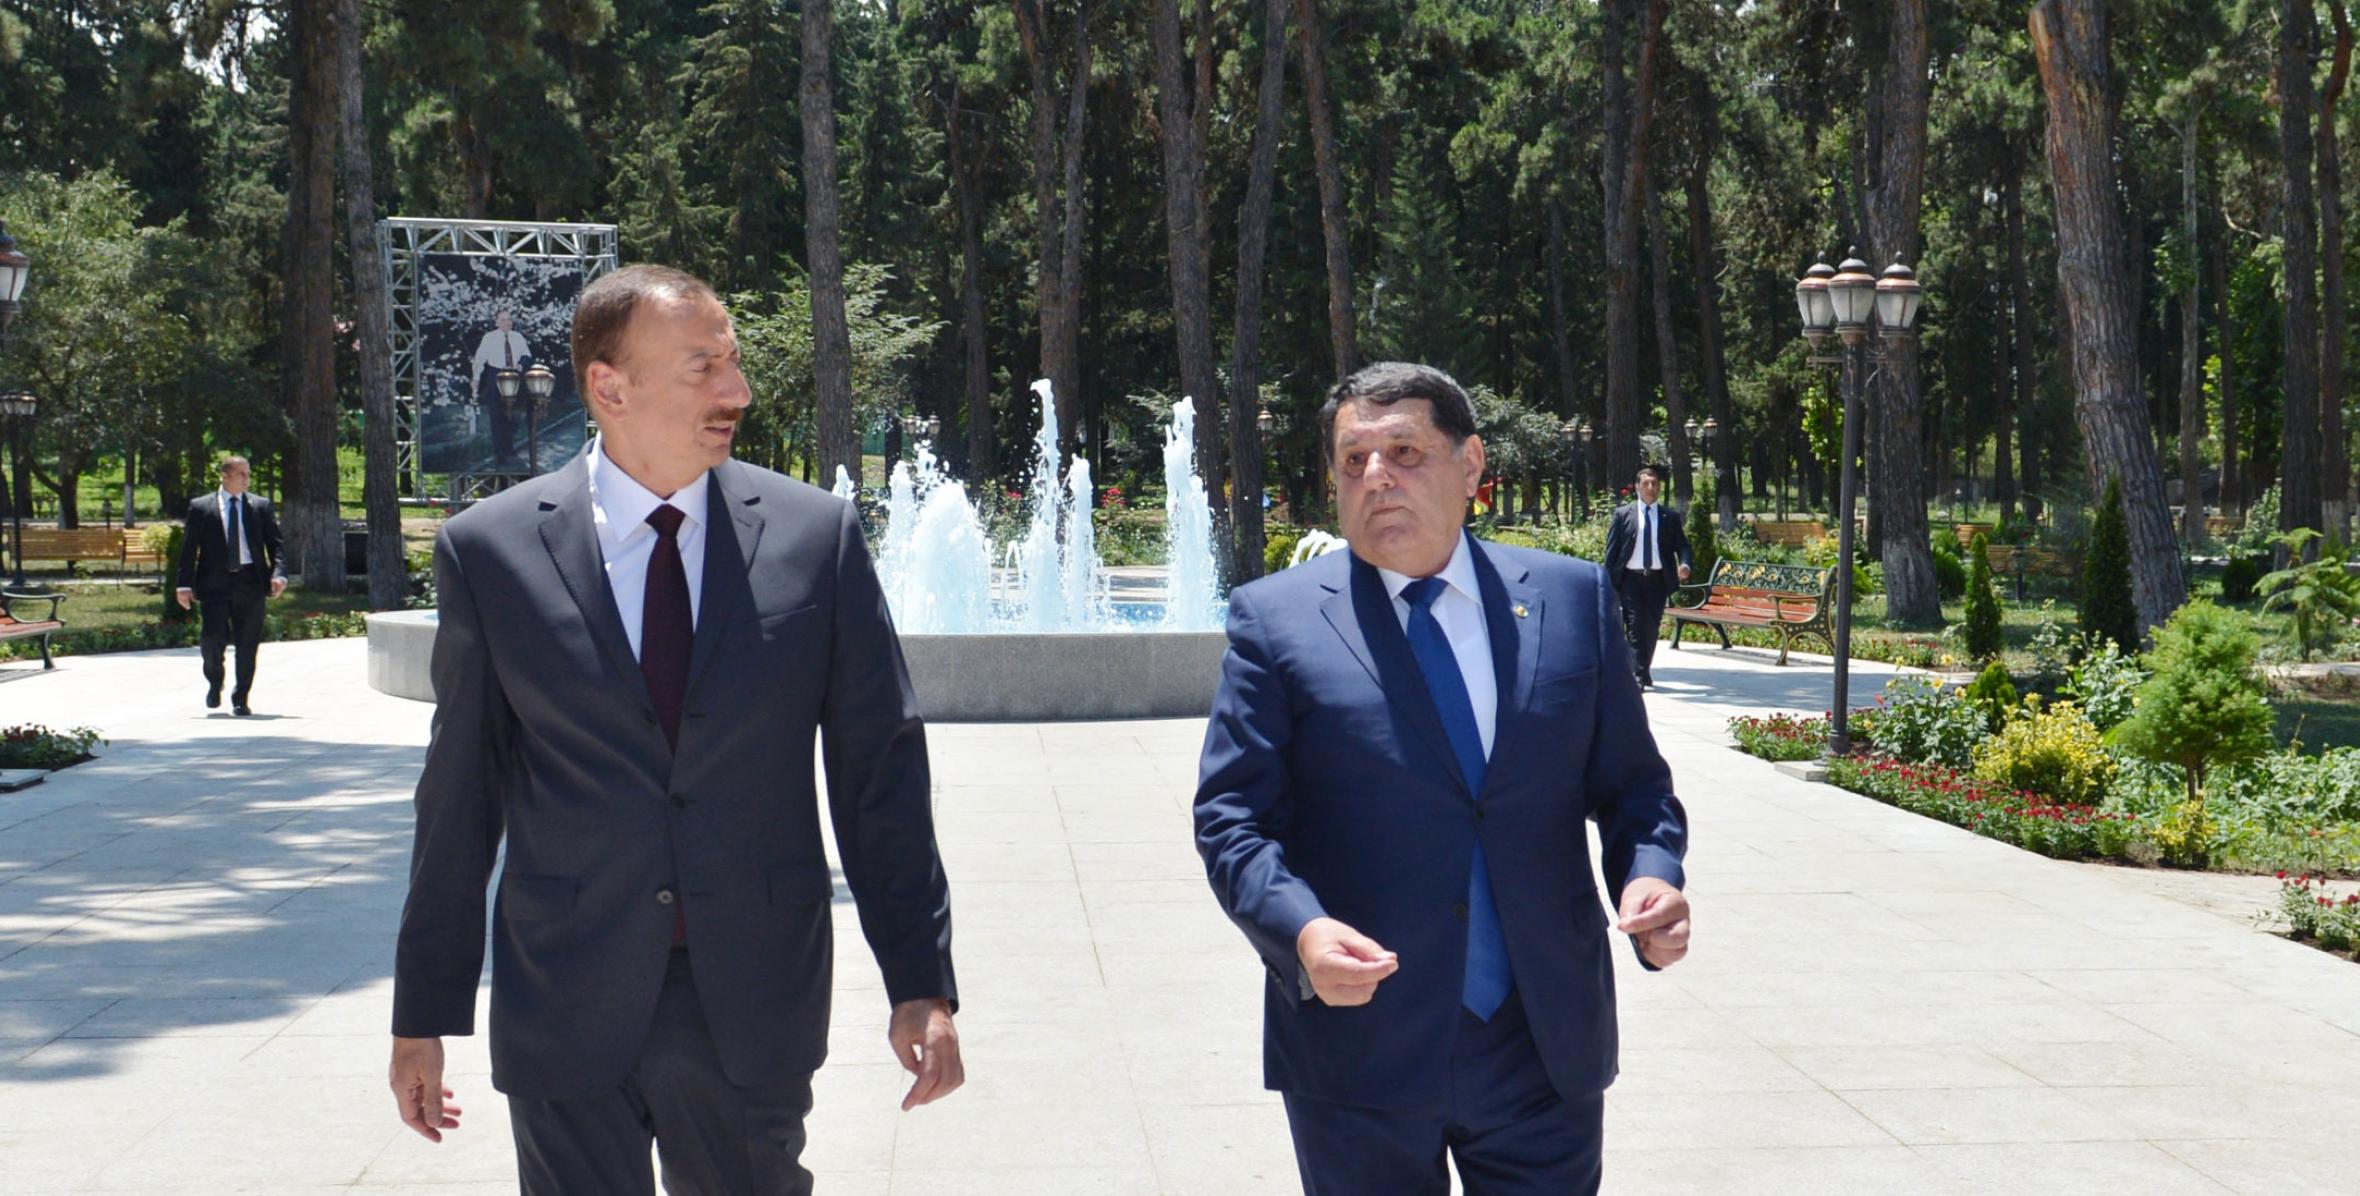 Ilham Aliyev reviewed the Govlar municipal culture and recreation park in Tovuz District after reconstruction